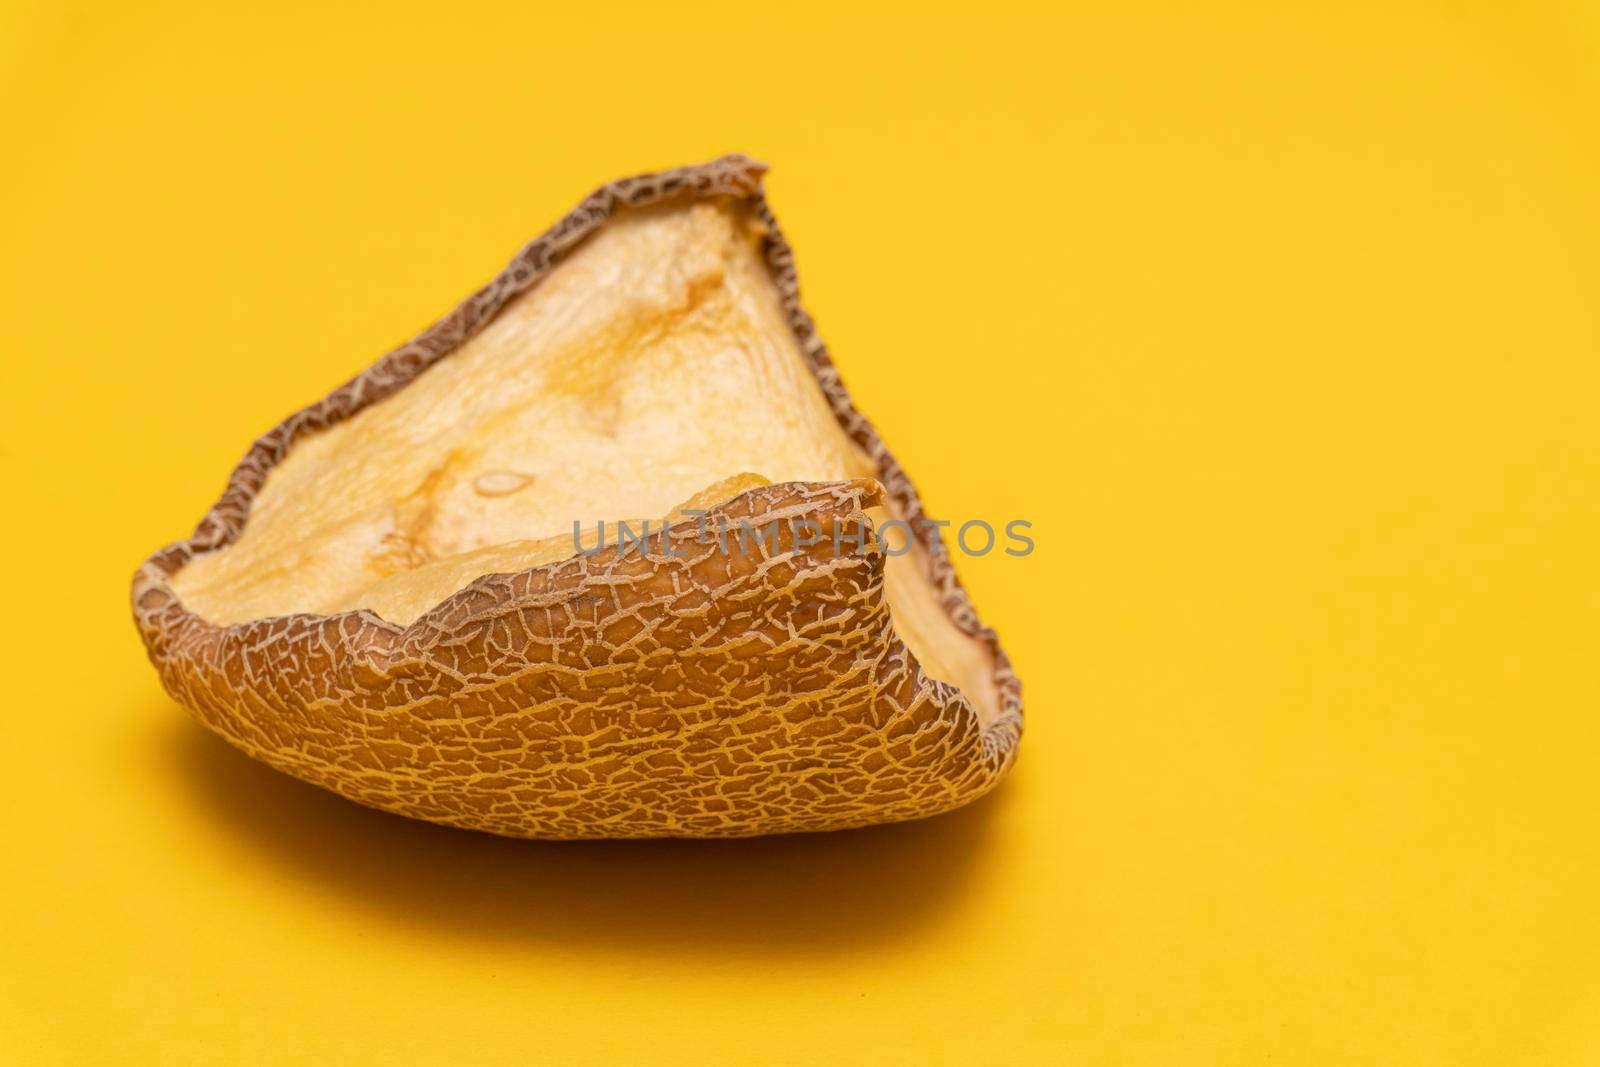 View at moldy dried melon at yellow background by uveita